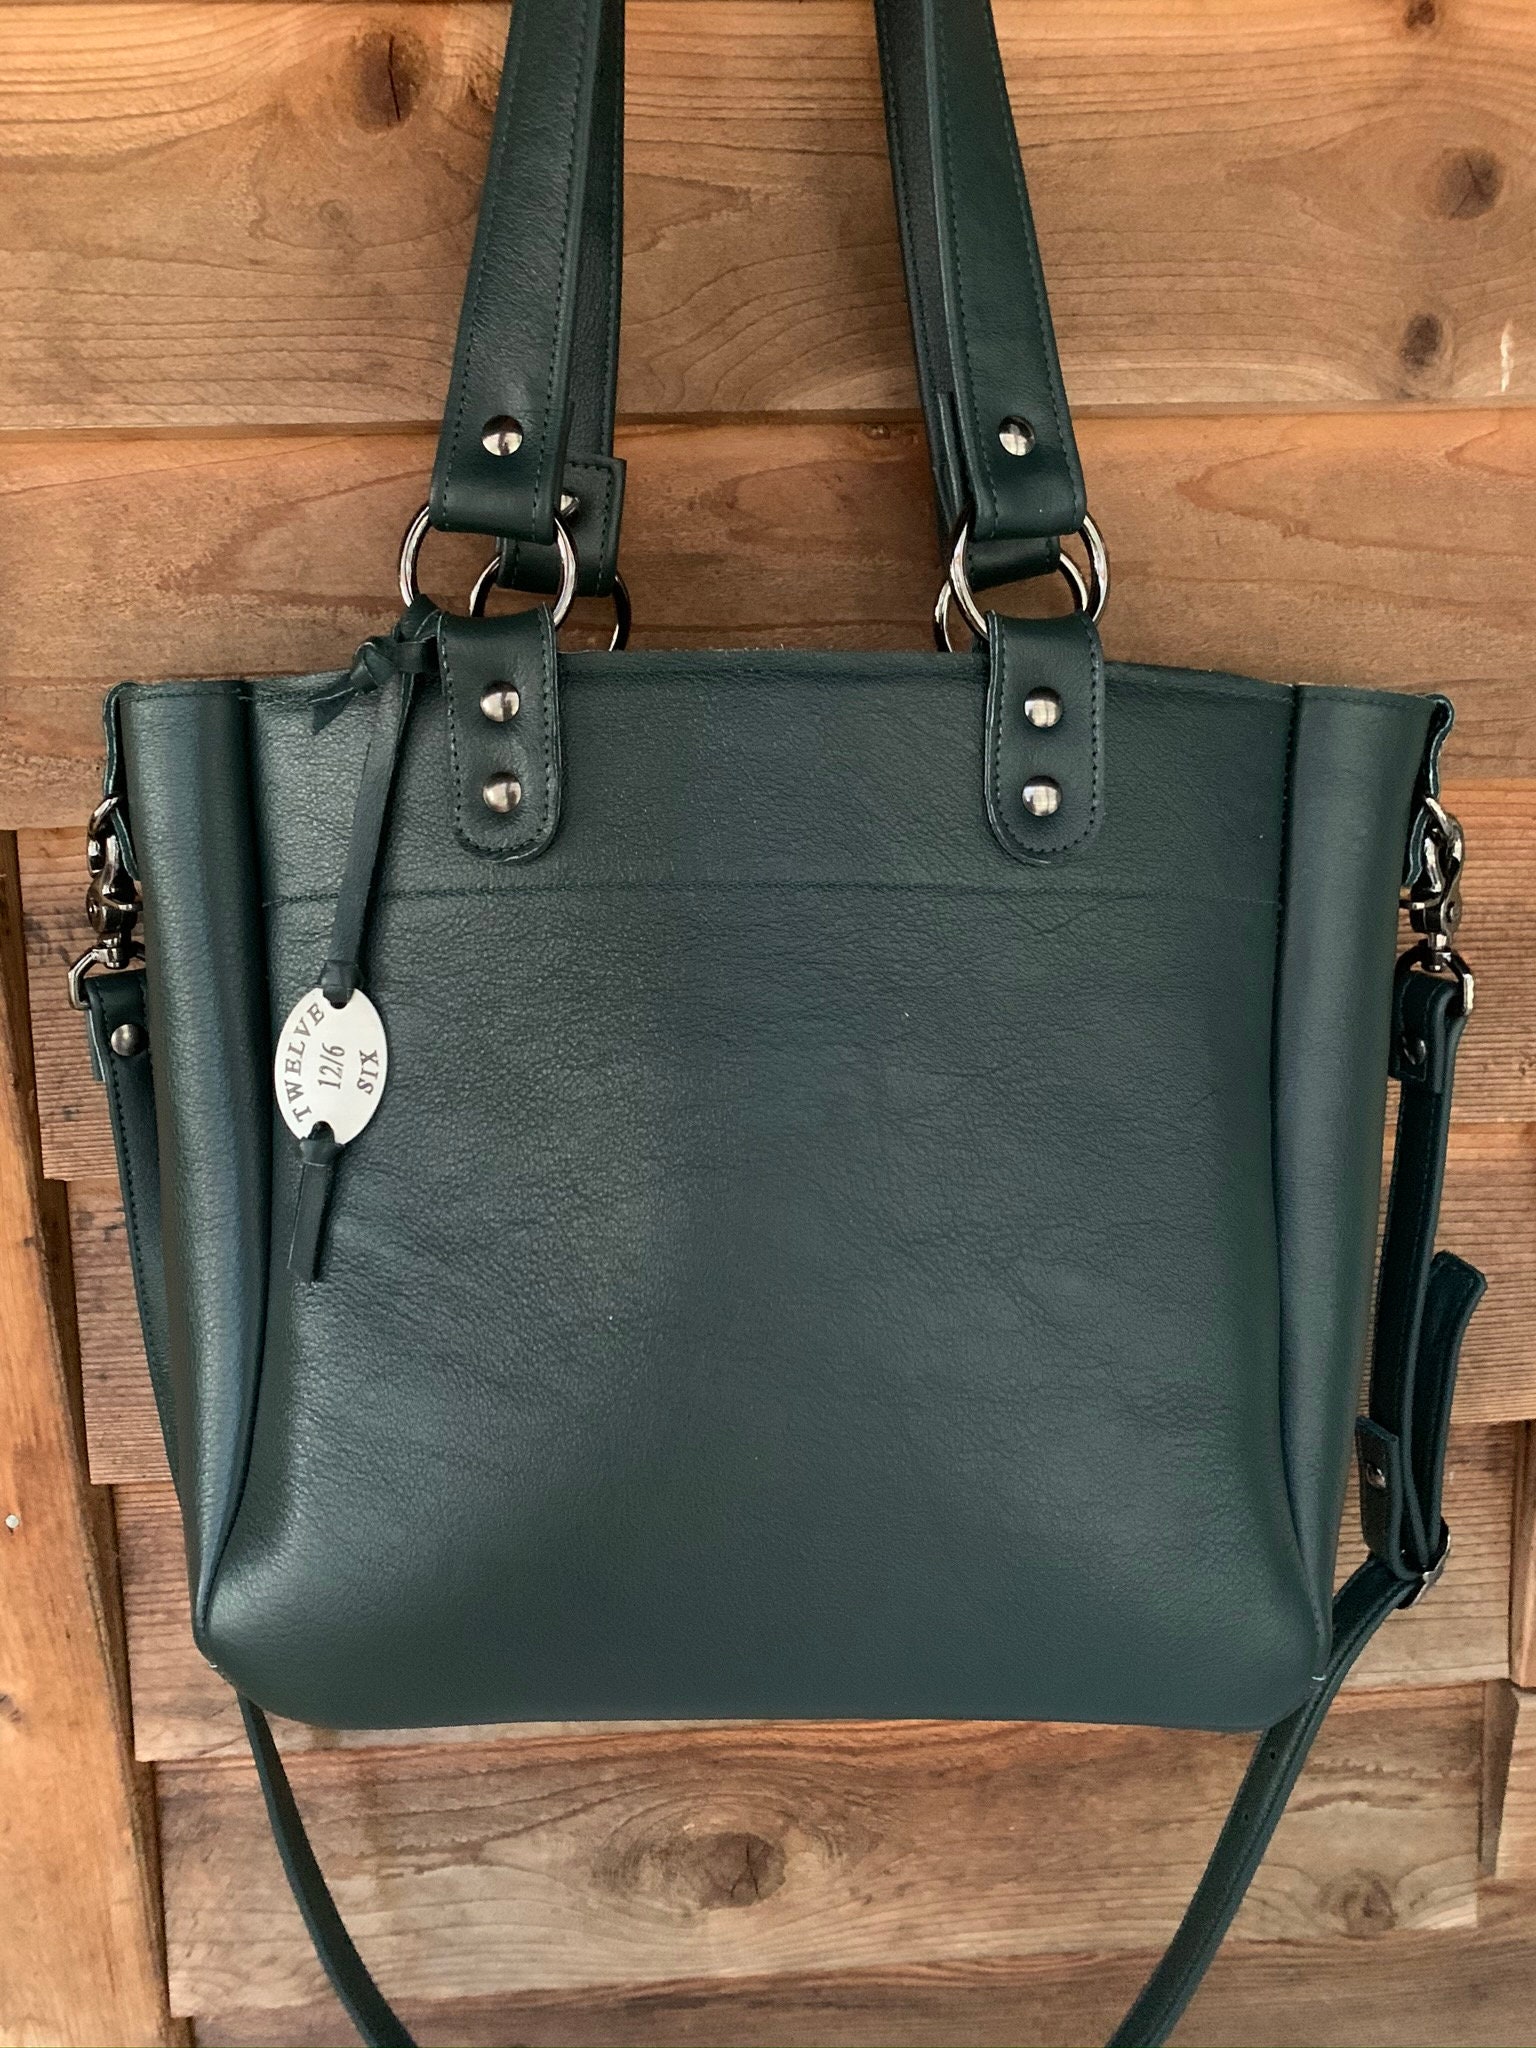 Concealed Carry Bag for Women - Brooklyn Tote by Lady Conceal Mahogany